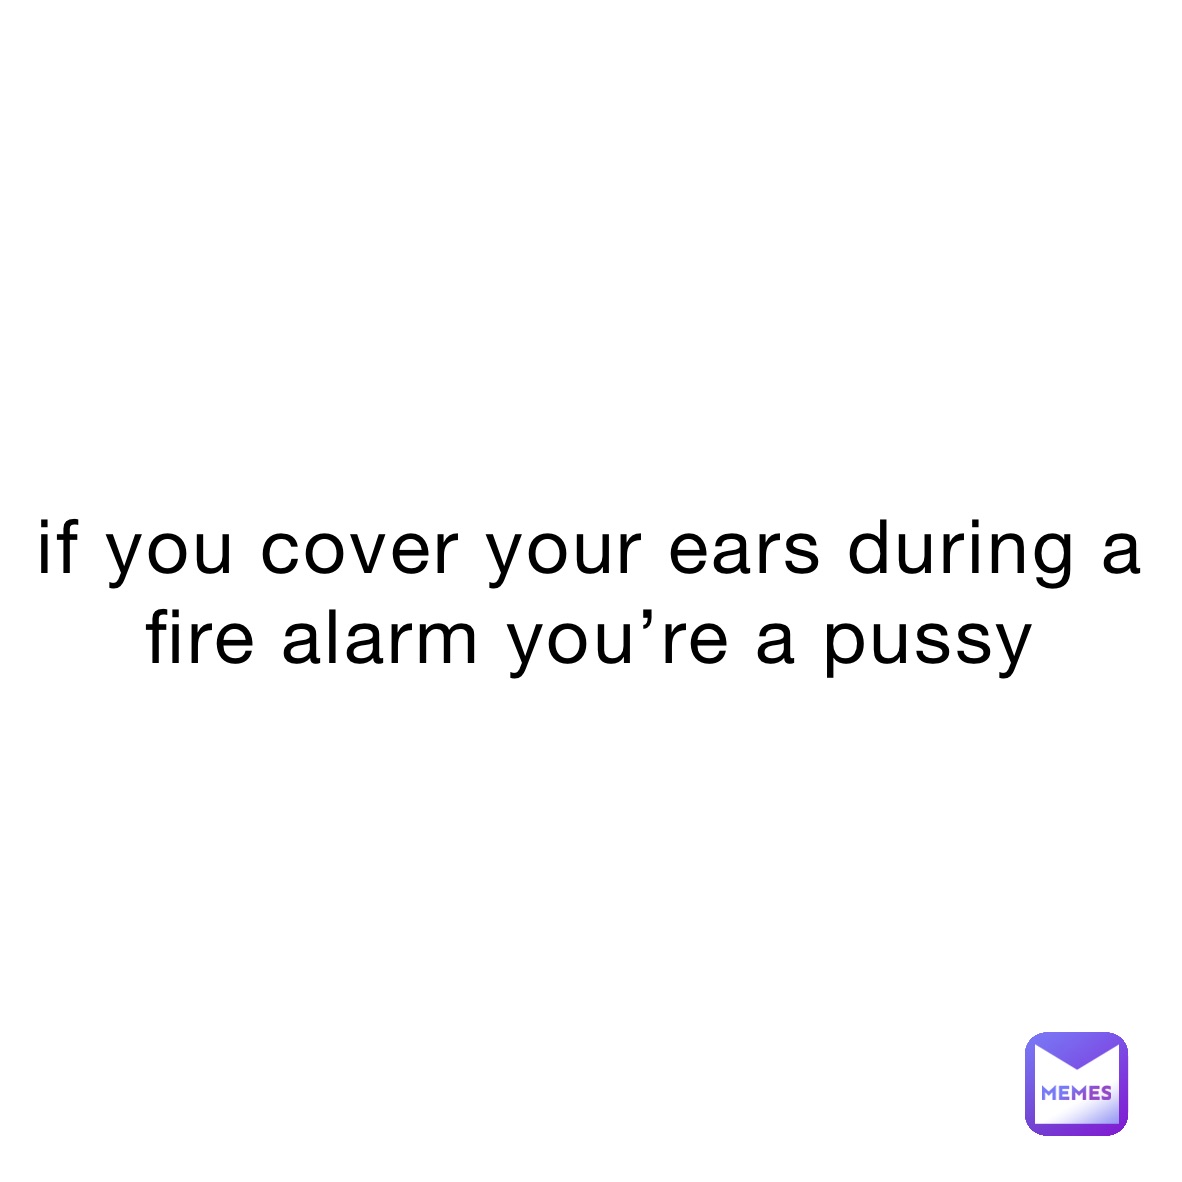 if you cover your ears during a fire alarm you’re a pussy